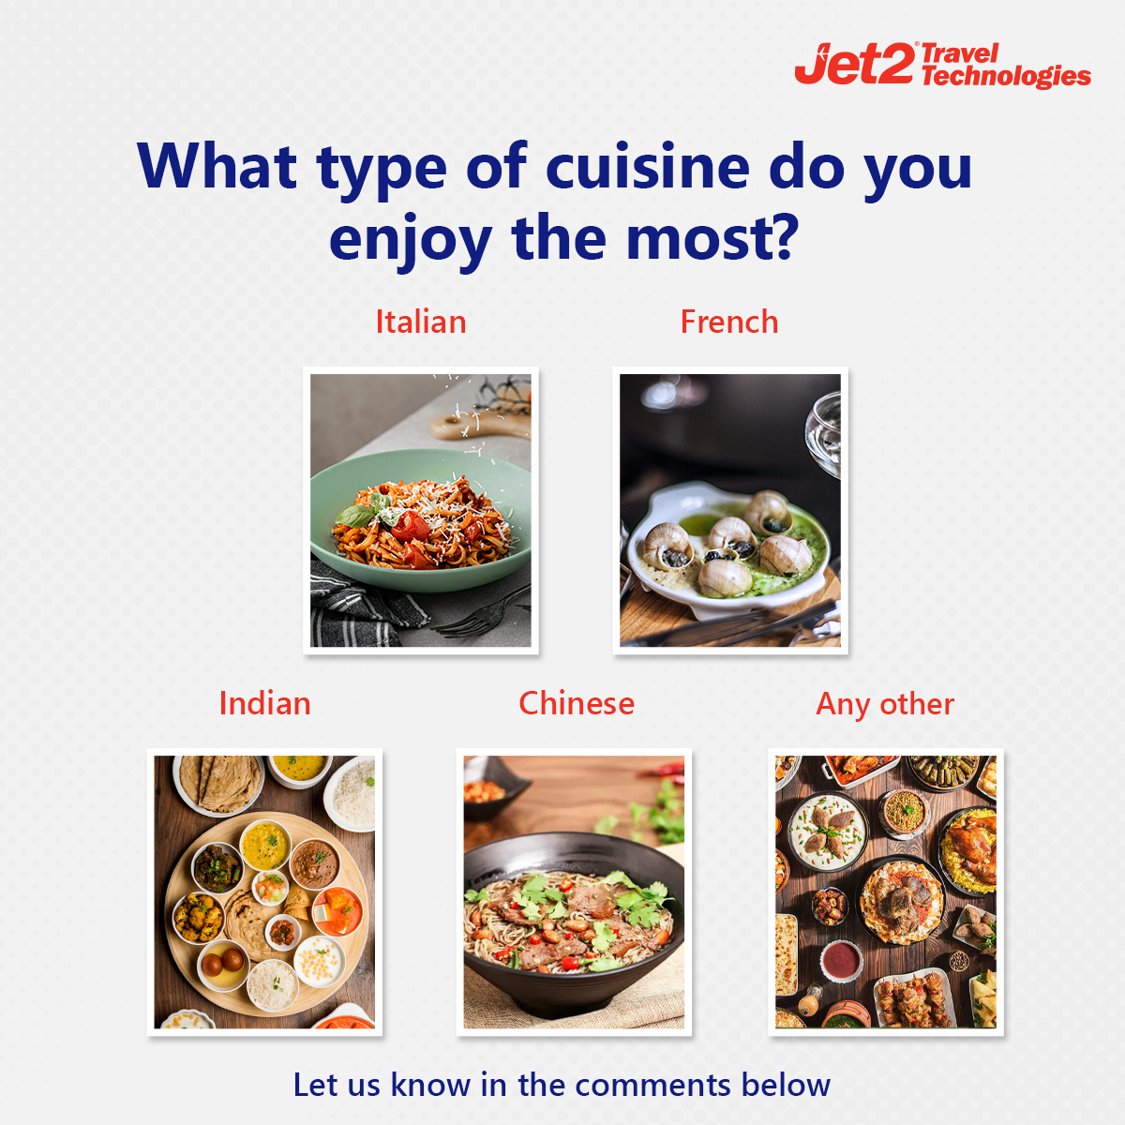 Let's talk food!
Which type of cuisine is your absolute favorite?

Share your pick with us in the comments below 🍴

#Jet2TT #Jet2TravelTechnologies #LifeAtJet2TT #PollOfTheDay #Employees #Hiring #Techhiring #Talentacquisition #Careers #Appdevelopers #JobAlert #TechJobs